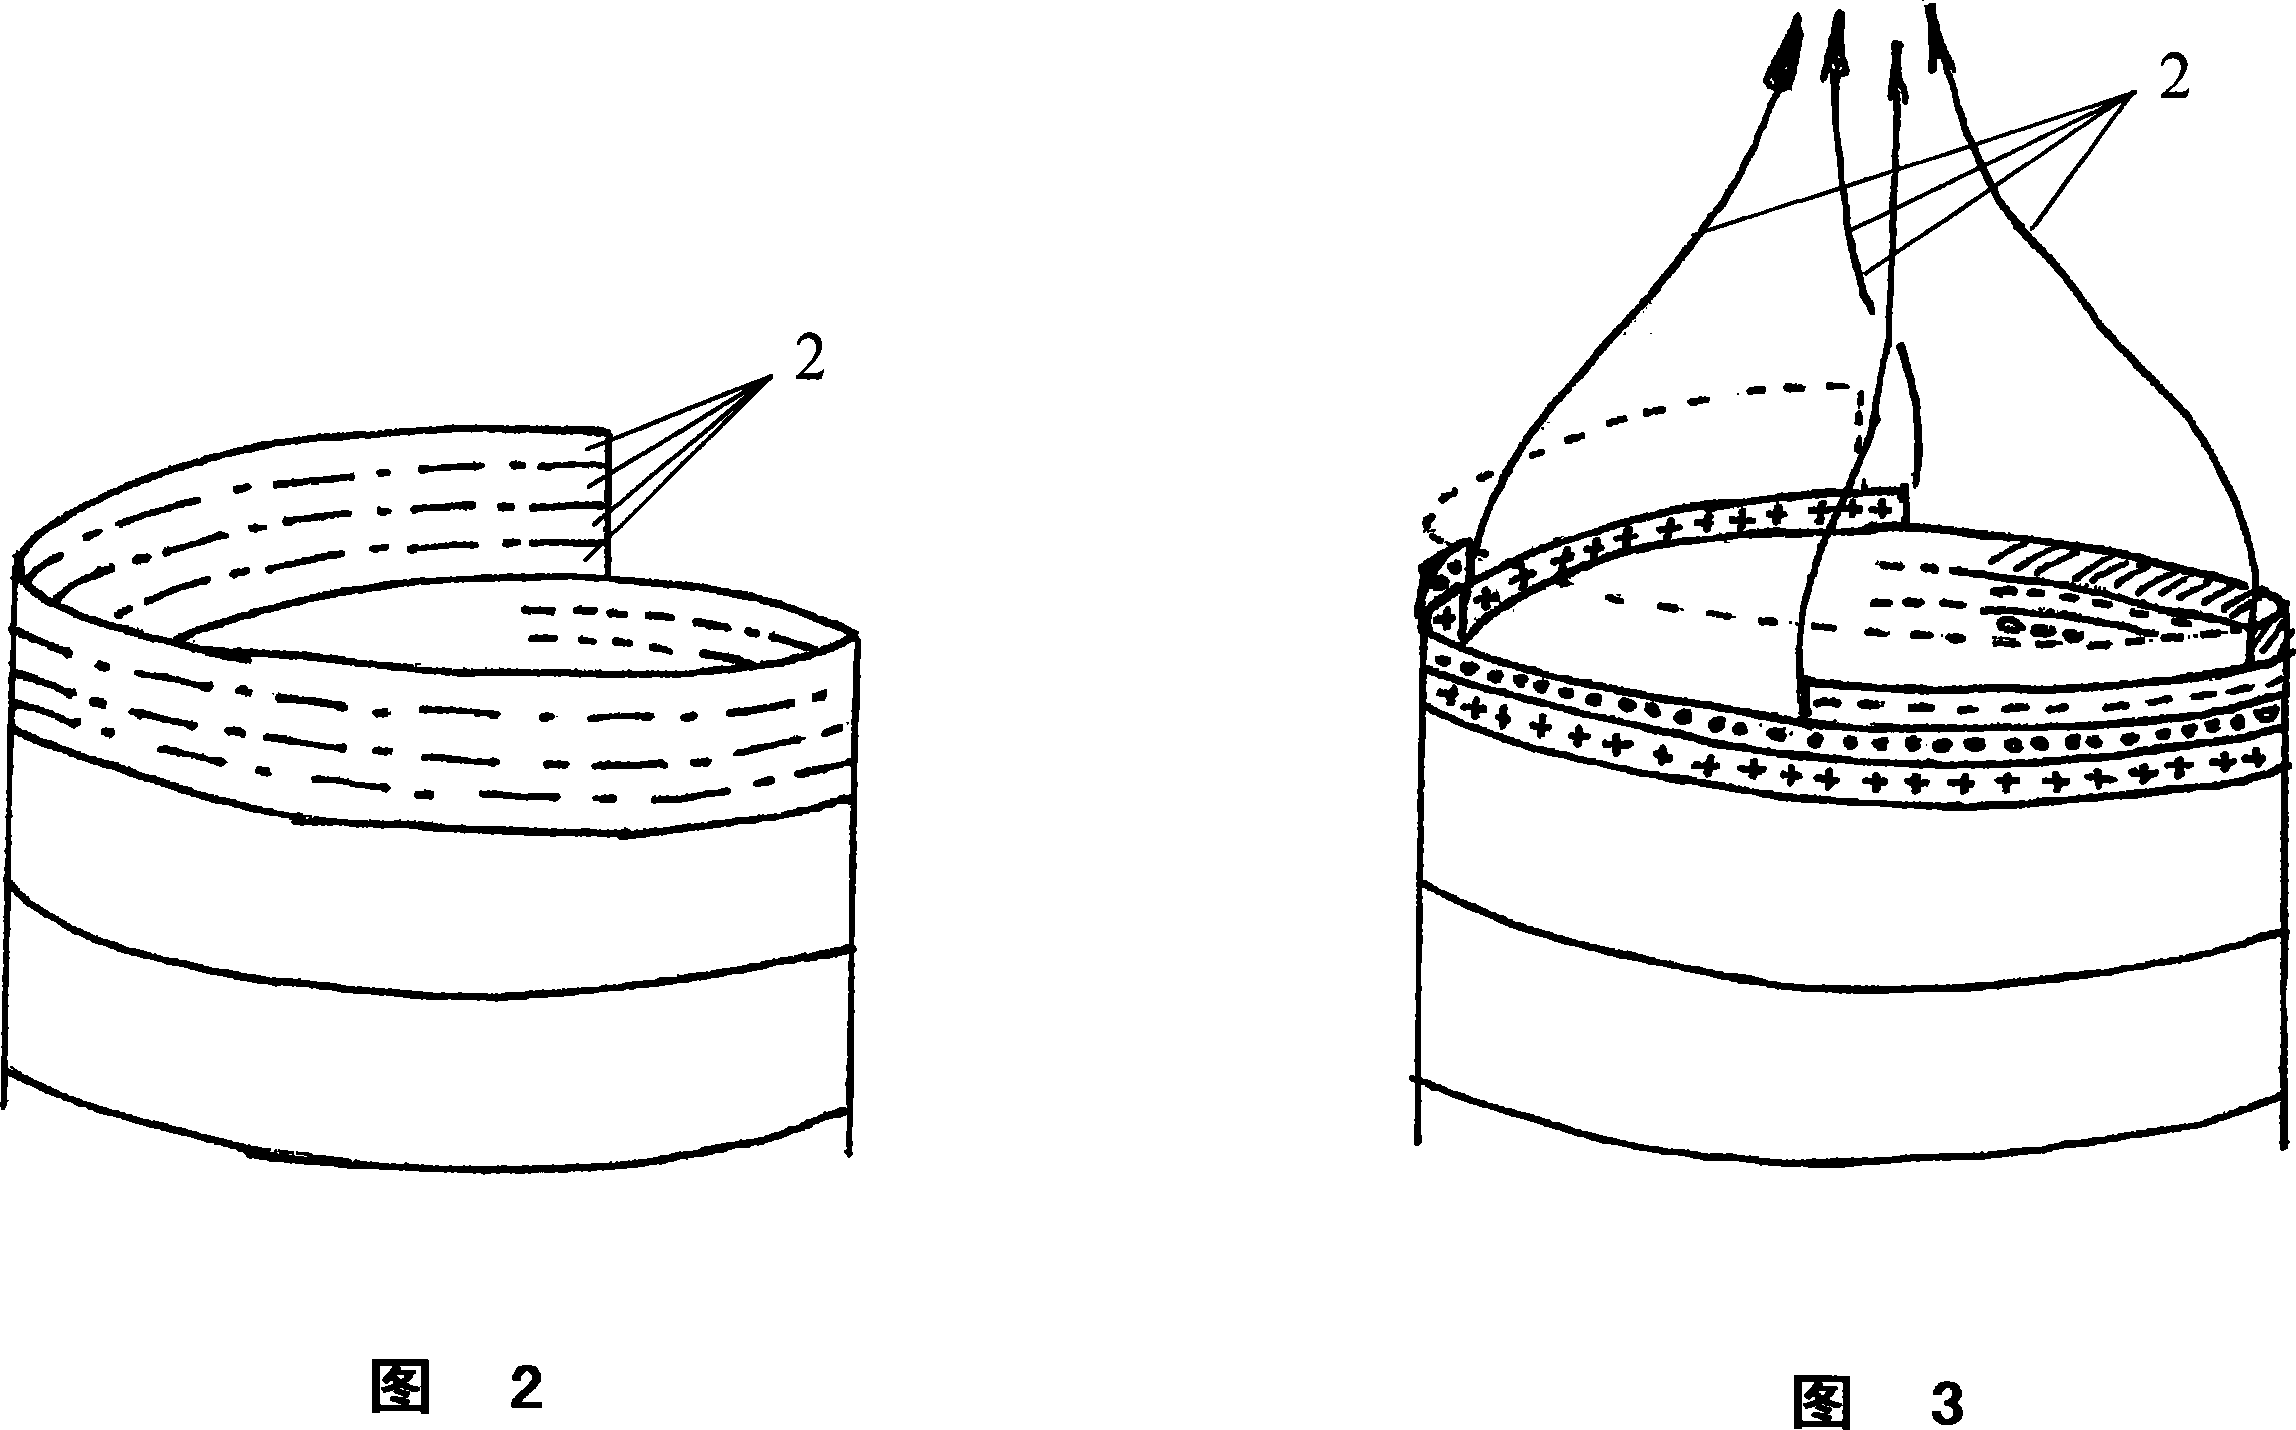 Process for treating threads by knitting-unraveling